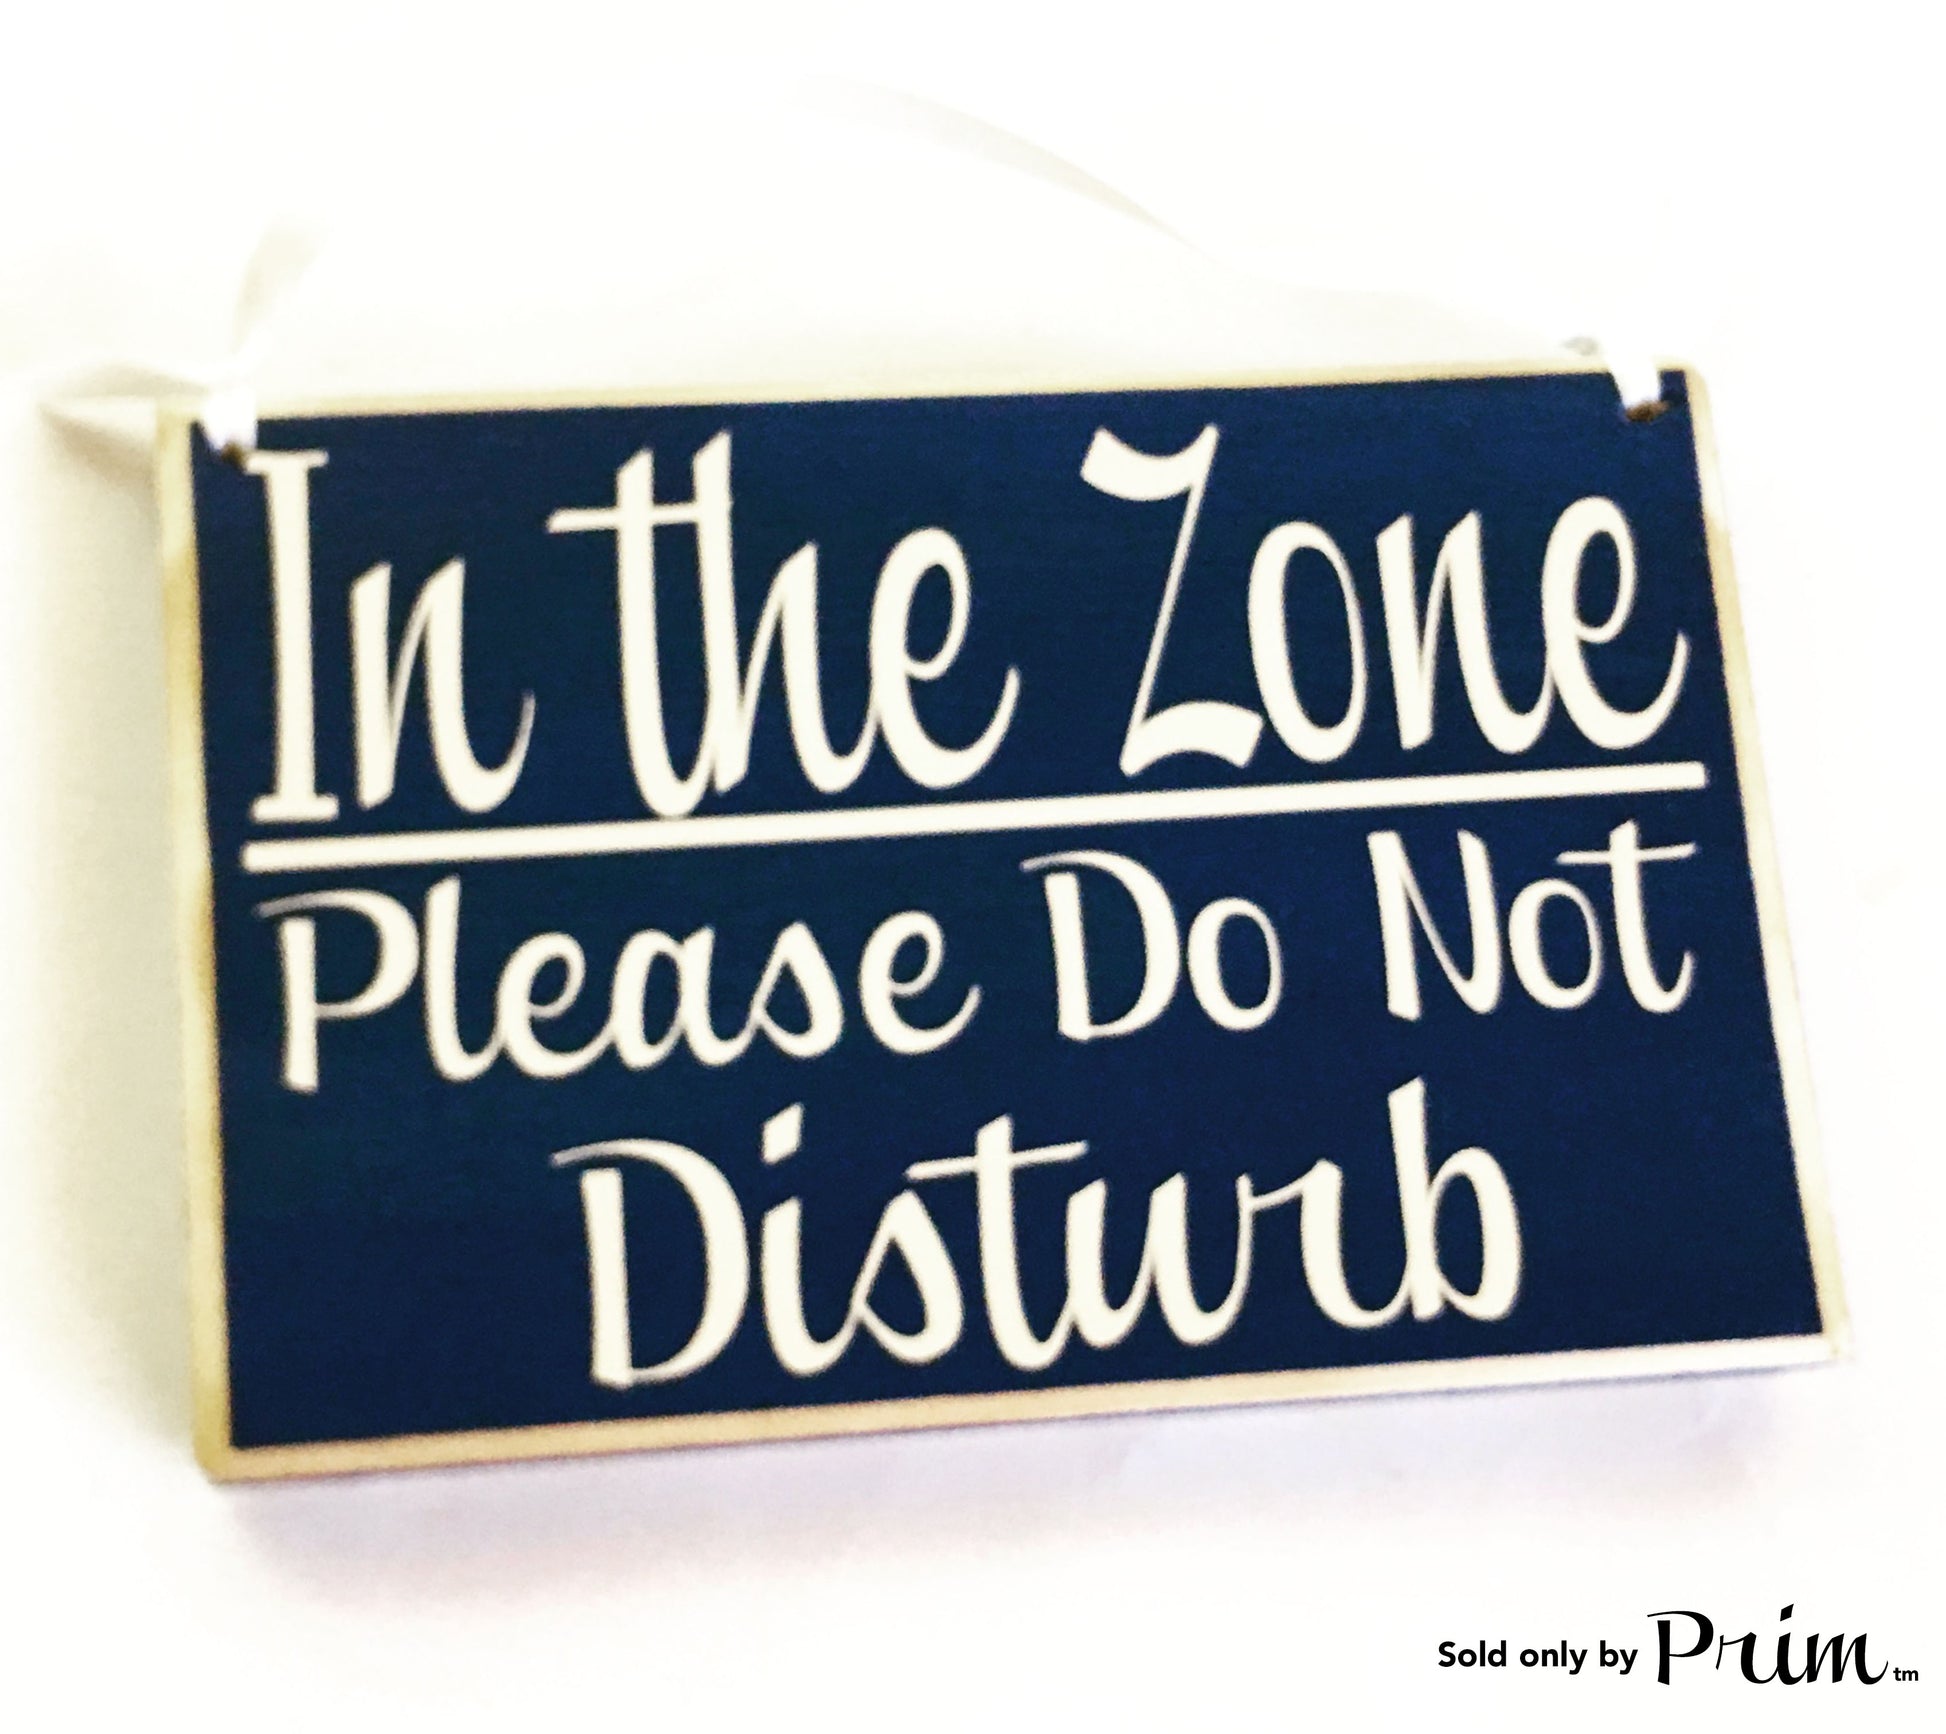 8x6 In The Zone Please Do Not Disturb Custom Wood Sign In Session Progress In A Meeting Conference Shhh Do Not Enter Private Custom Door Plaque